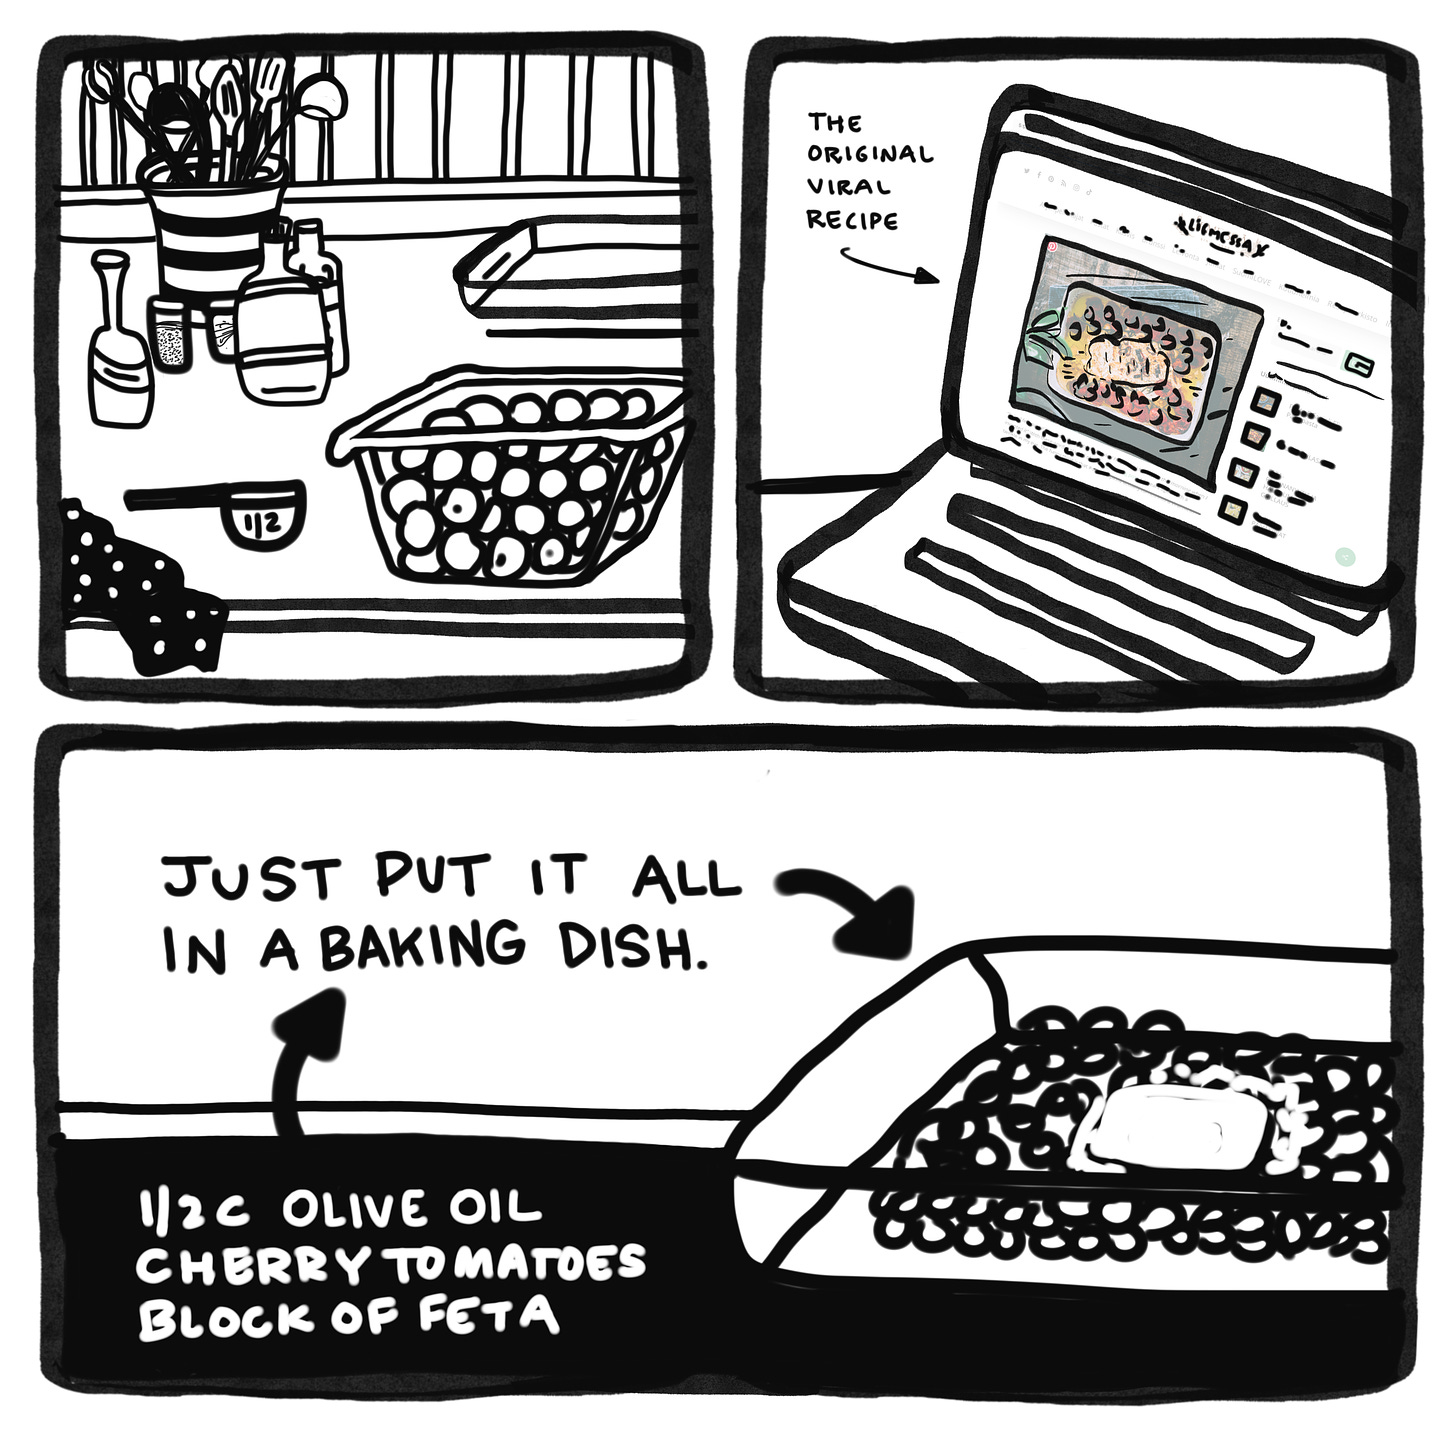 Panels 5-7 of a graphic novel set showing the making of Baked Feta Pasta